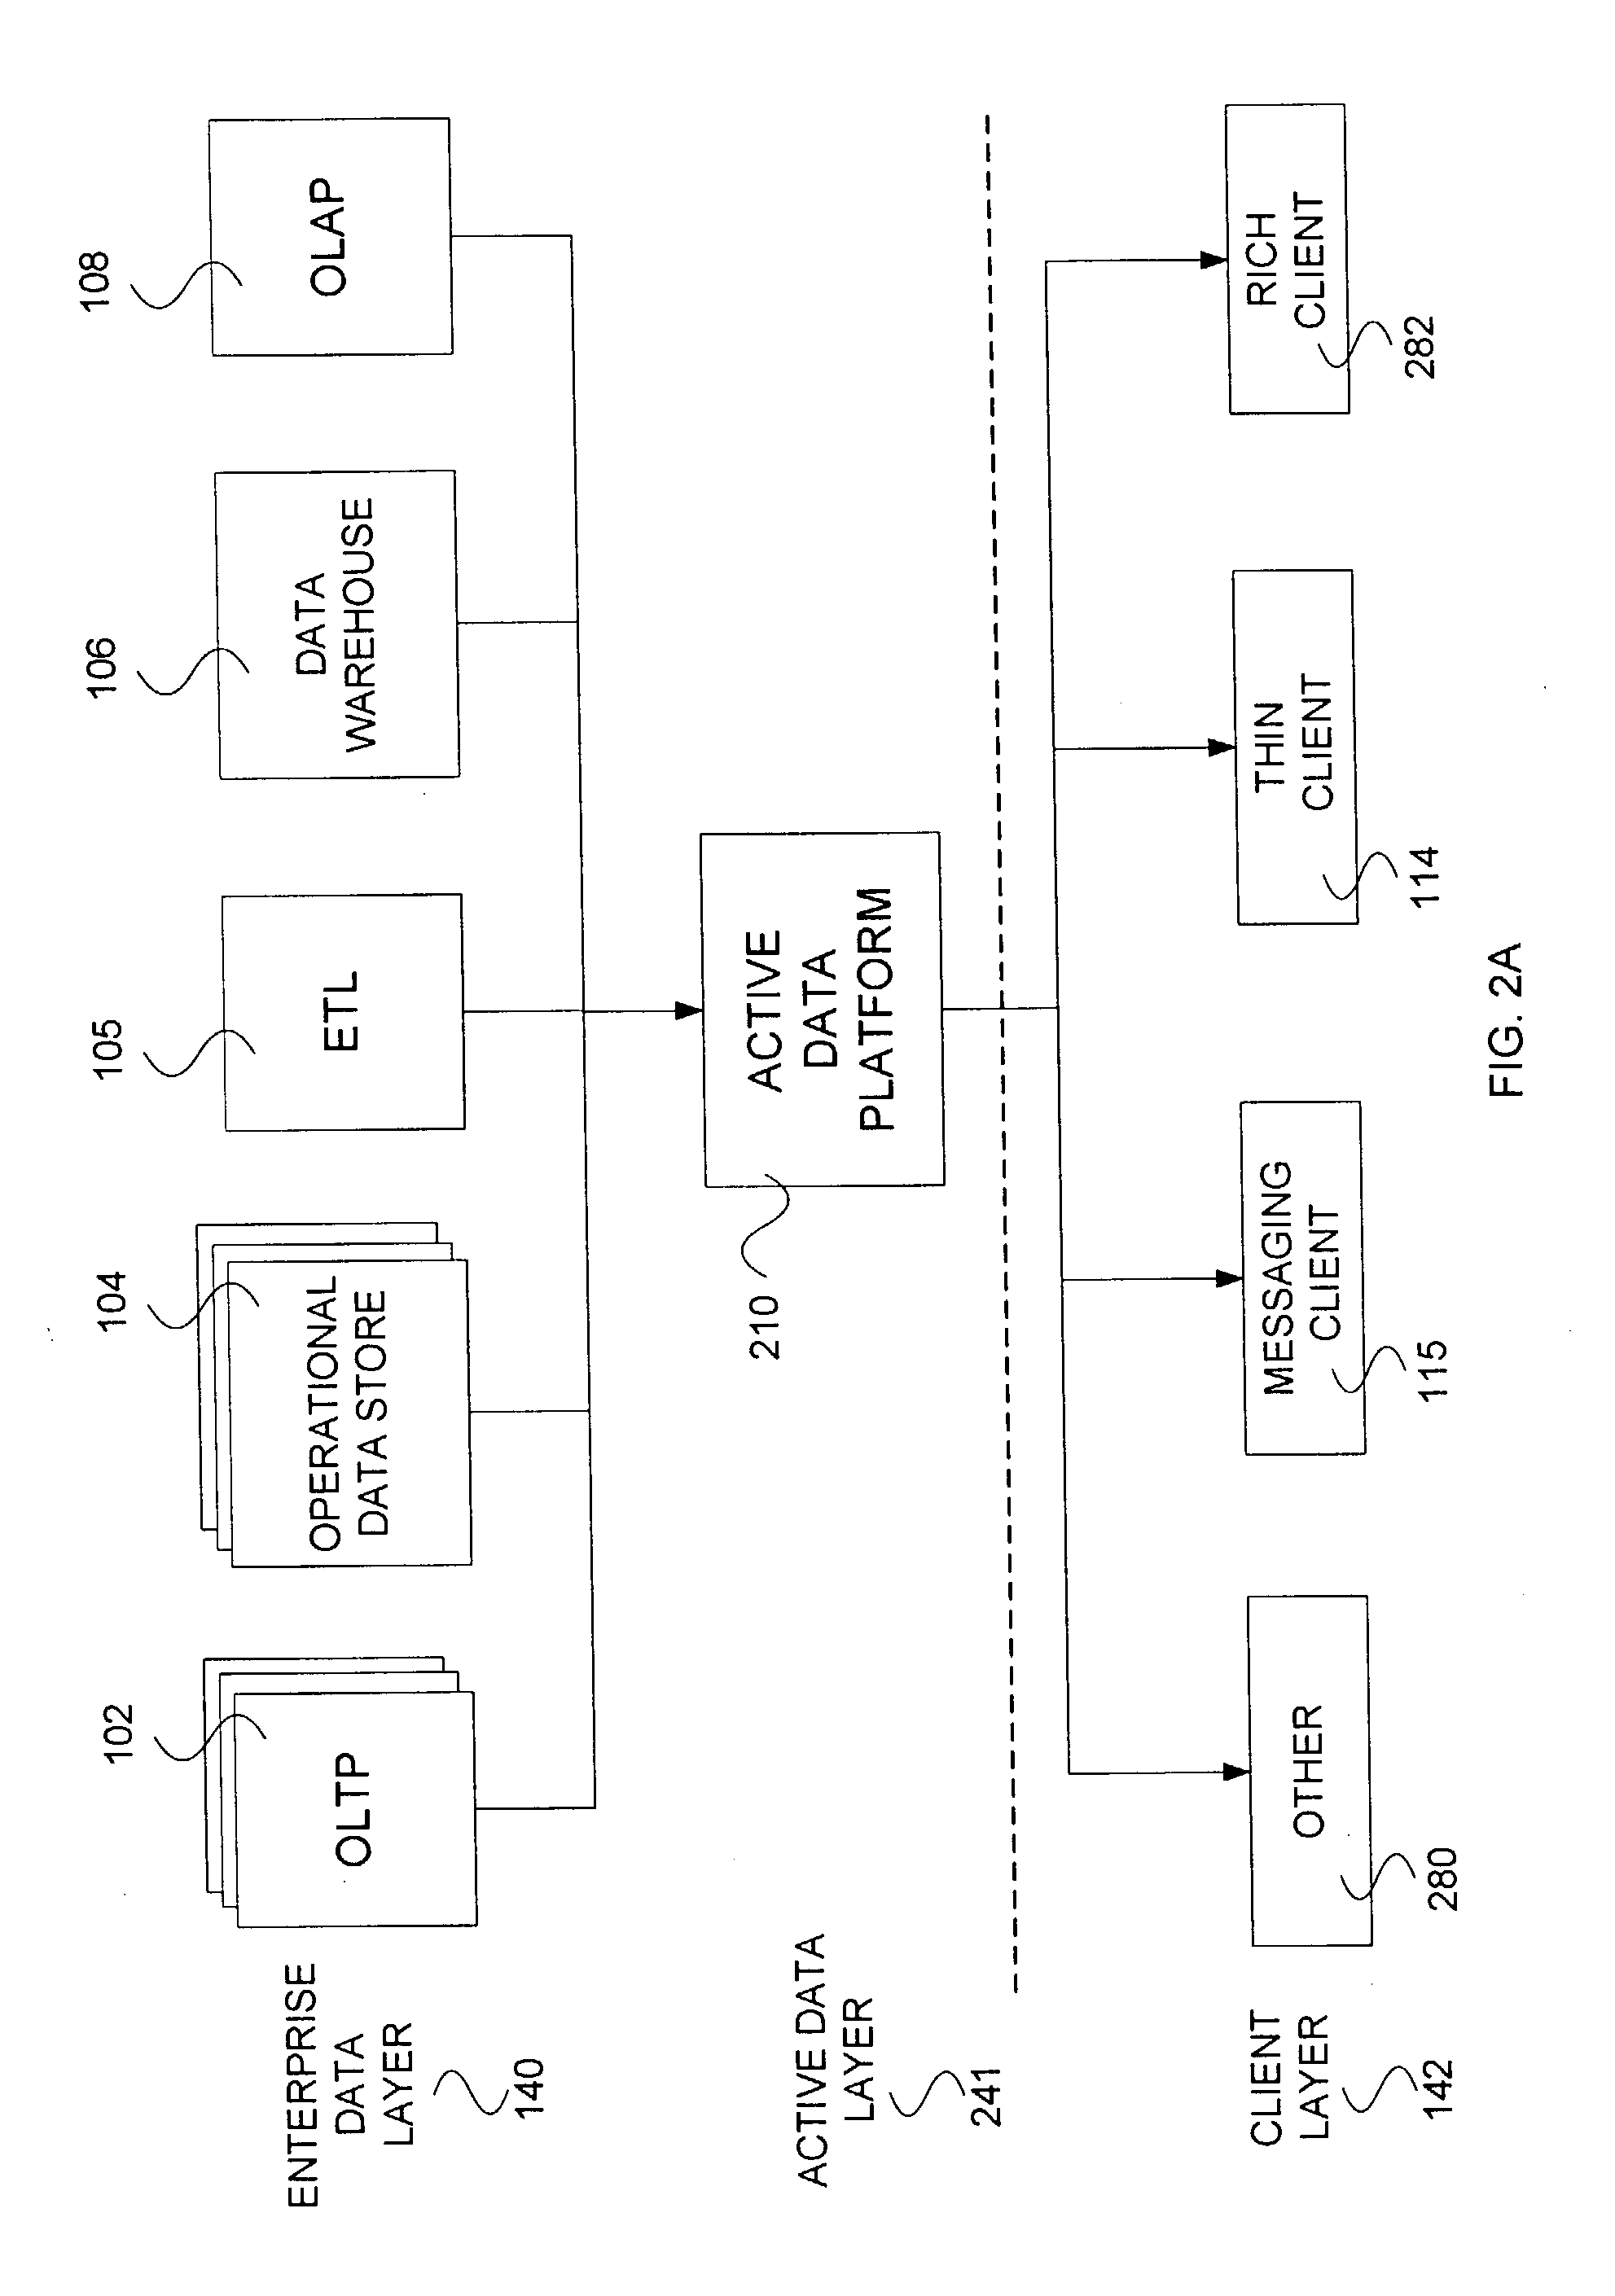 Method and apparatus for distributed rule evaluation in a near real-time business intelligence system